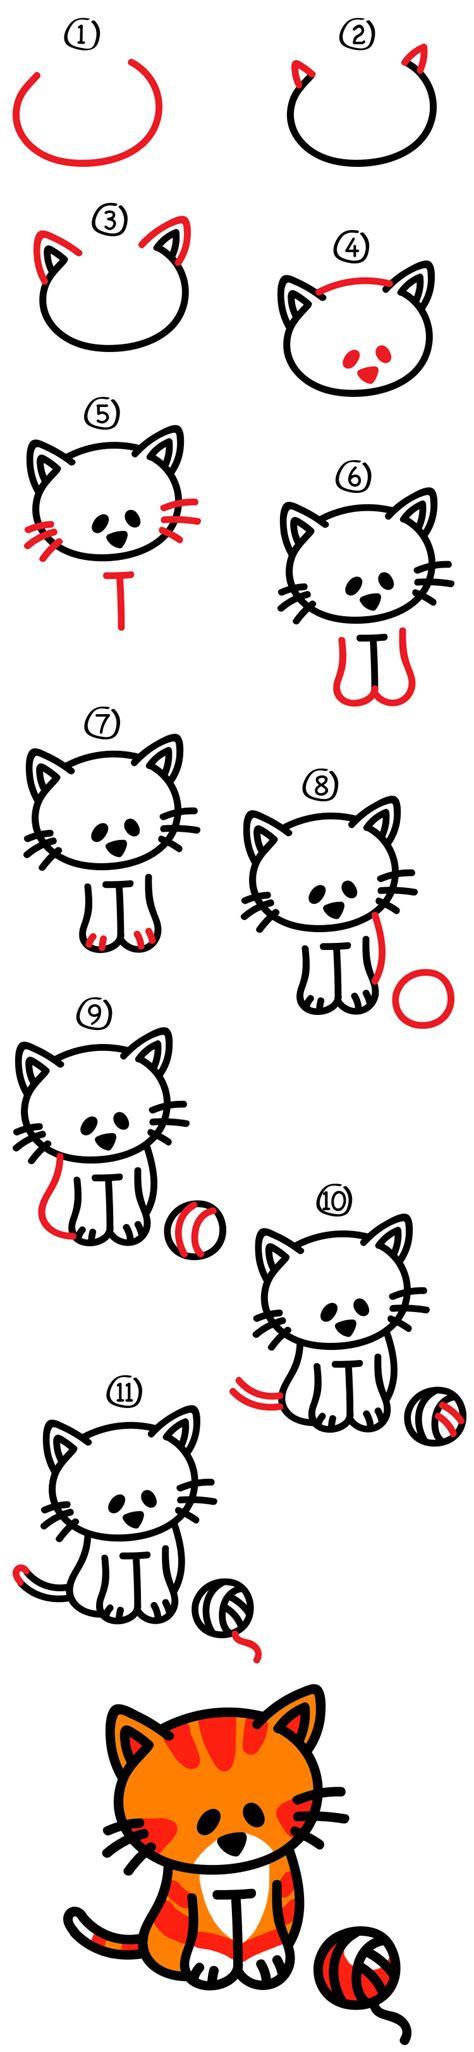 Cartoon Cat Drawing Step By Step How To Draw A Cartoon Cat Printable